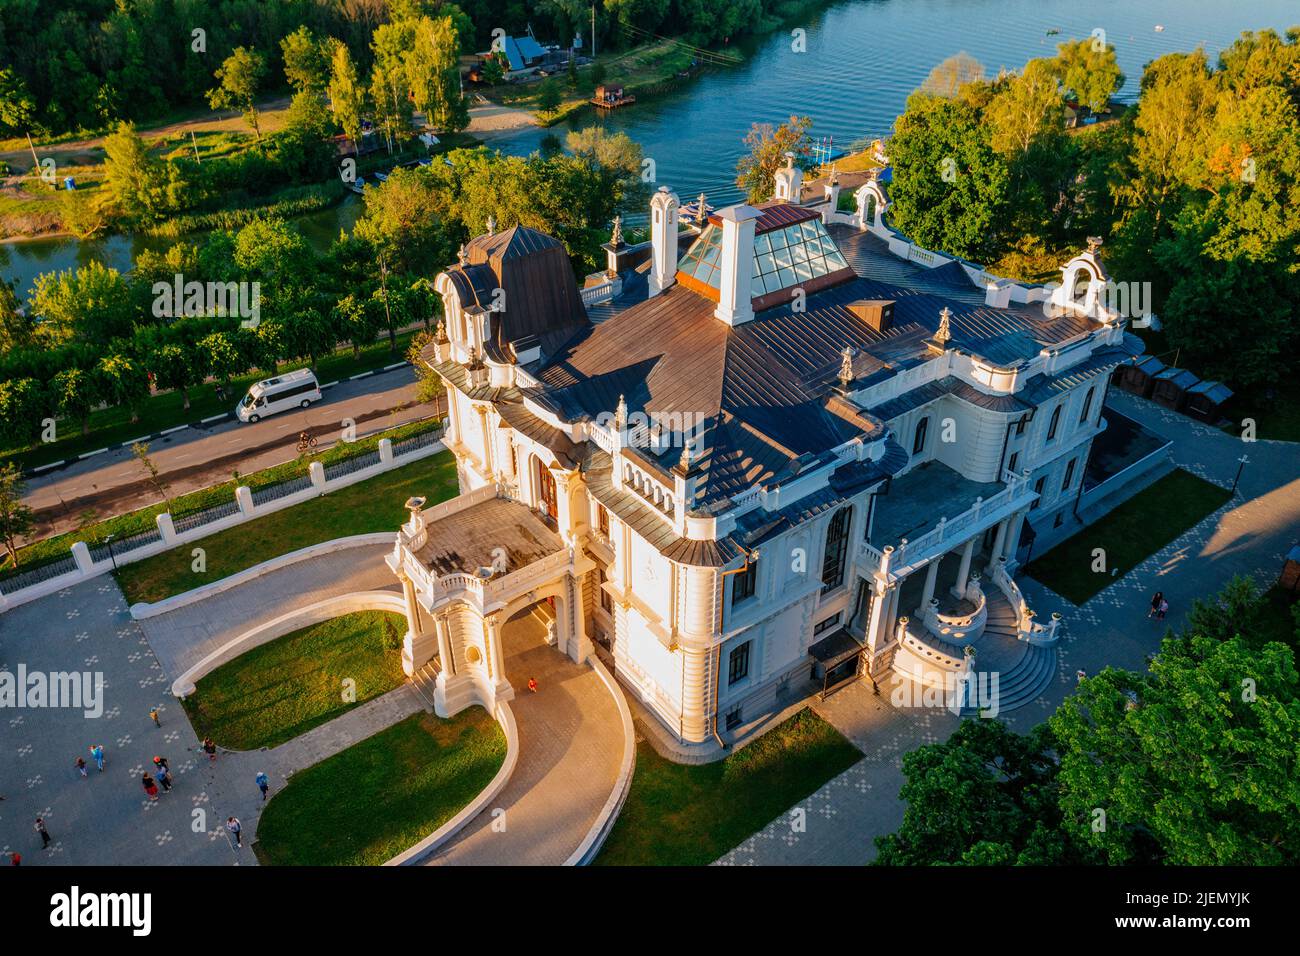 Former Aseev Mansion in Tambov, aerial view Stock Photo